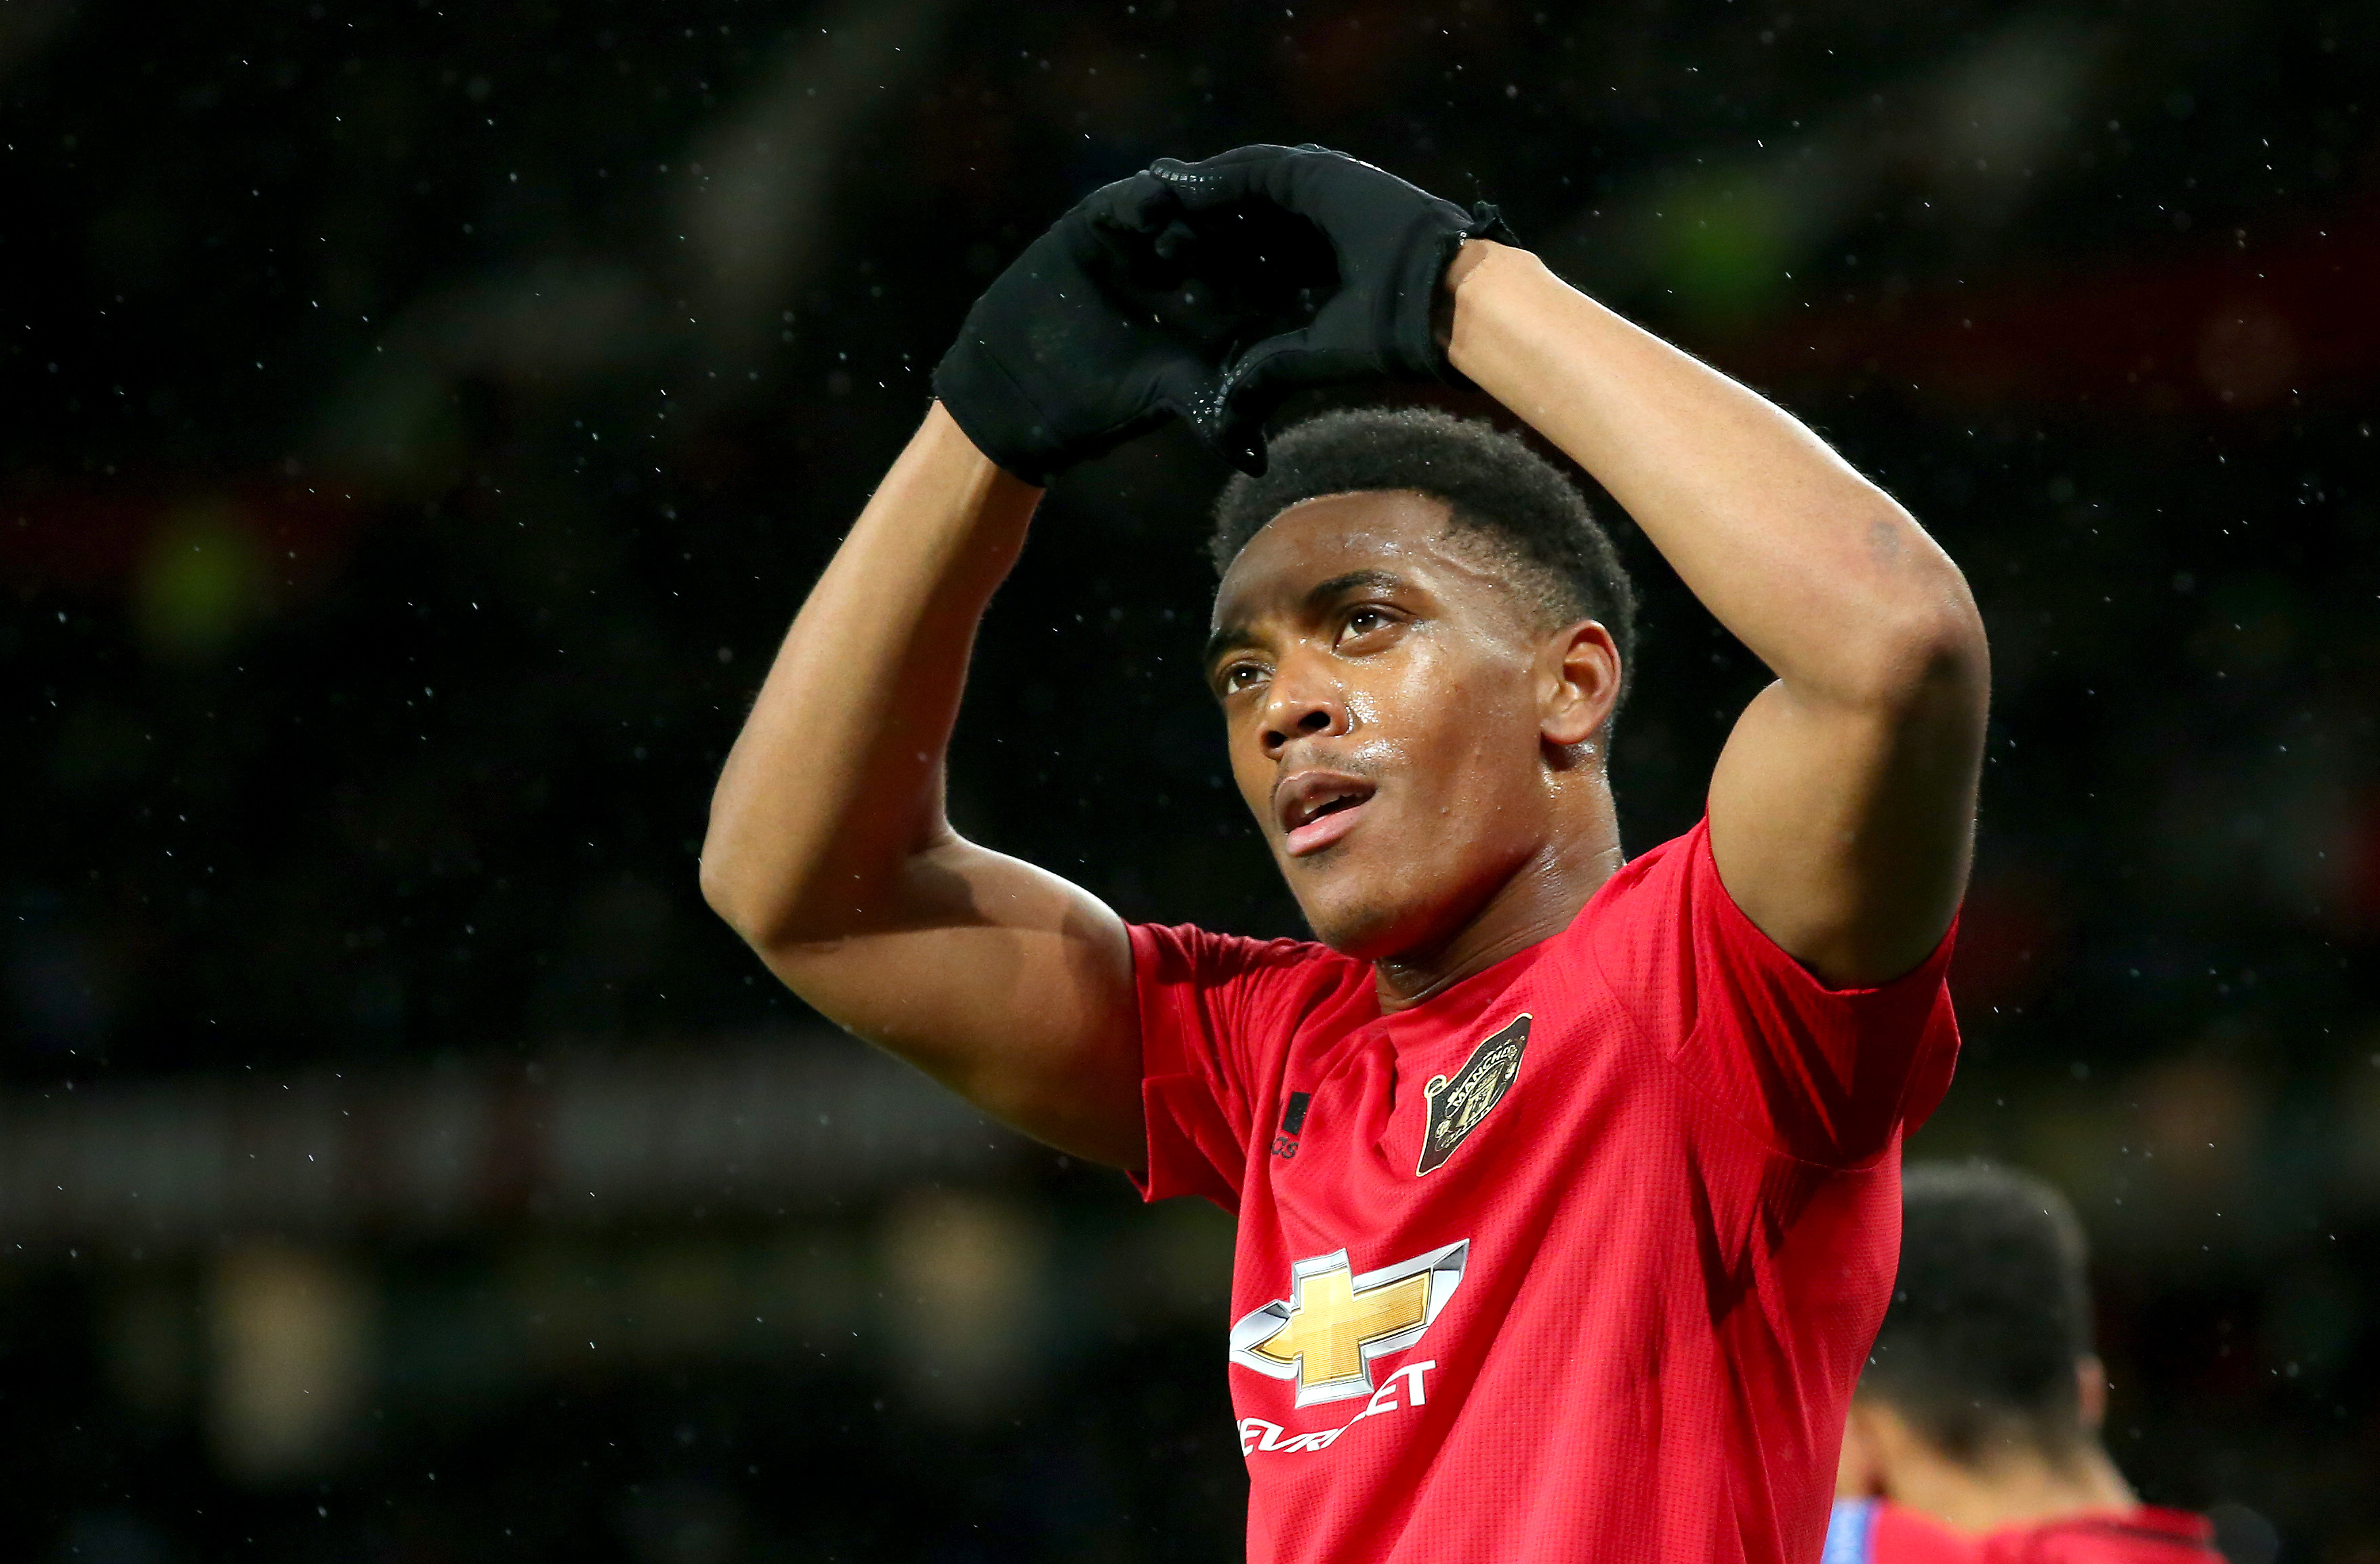 MANCHESTER, ENGLAND - NOVEMBER 07: Anthony Martial of Manchester United celebrates after scoring his team's second goal  during the UEFA Europa League group L match between Manchester United and Partizan at Old Trafford on November 07, 2019 in Manchester, United Kingdom. (Photo by Alex Livesey/Getty Images)